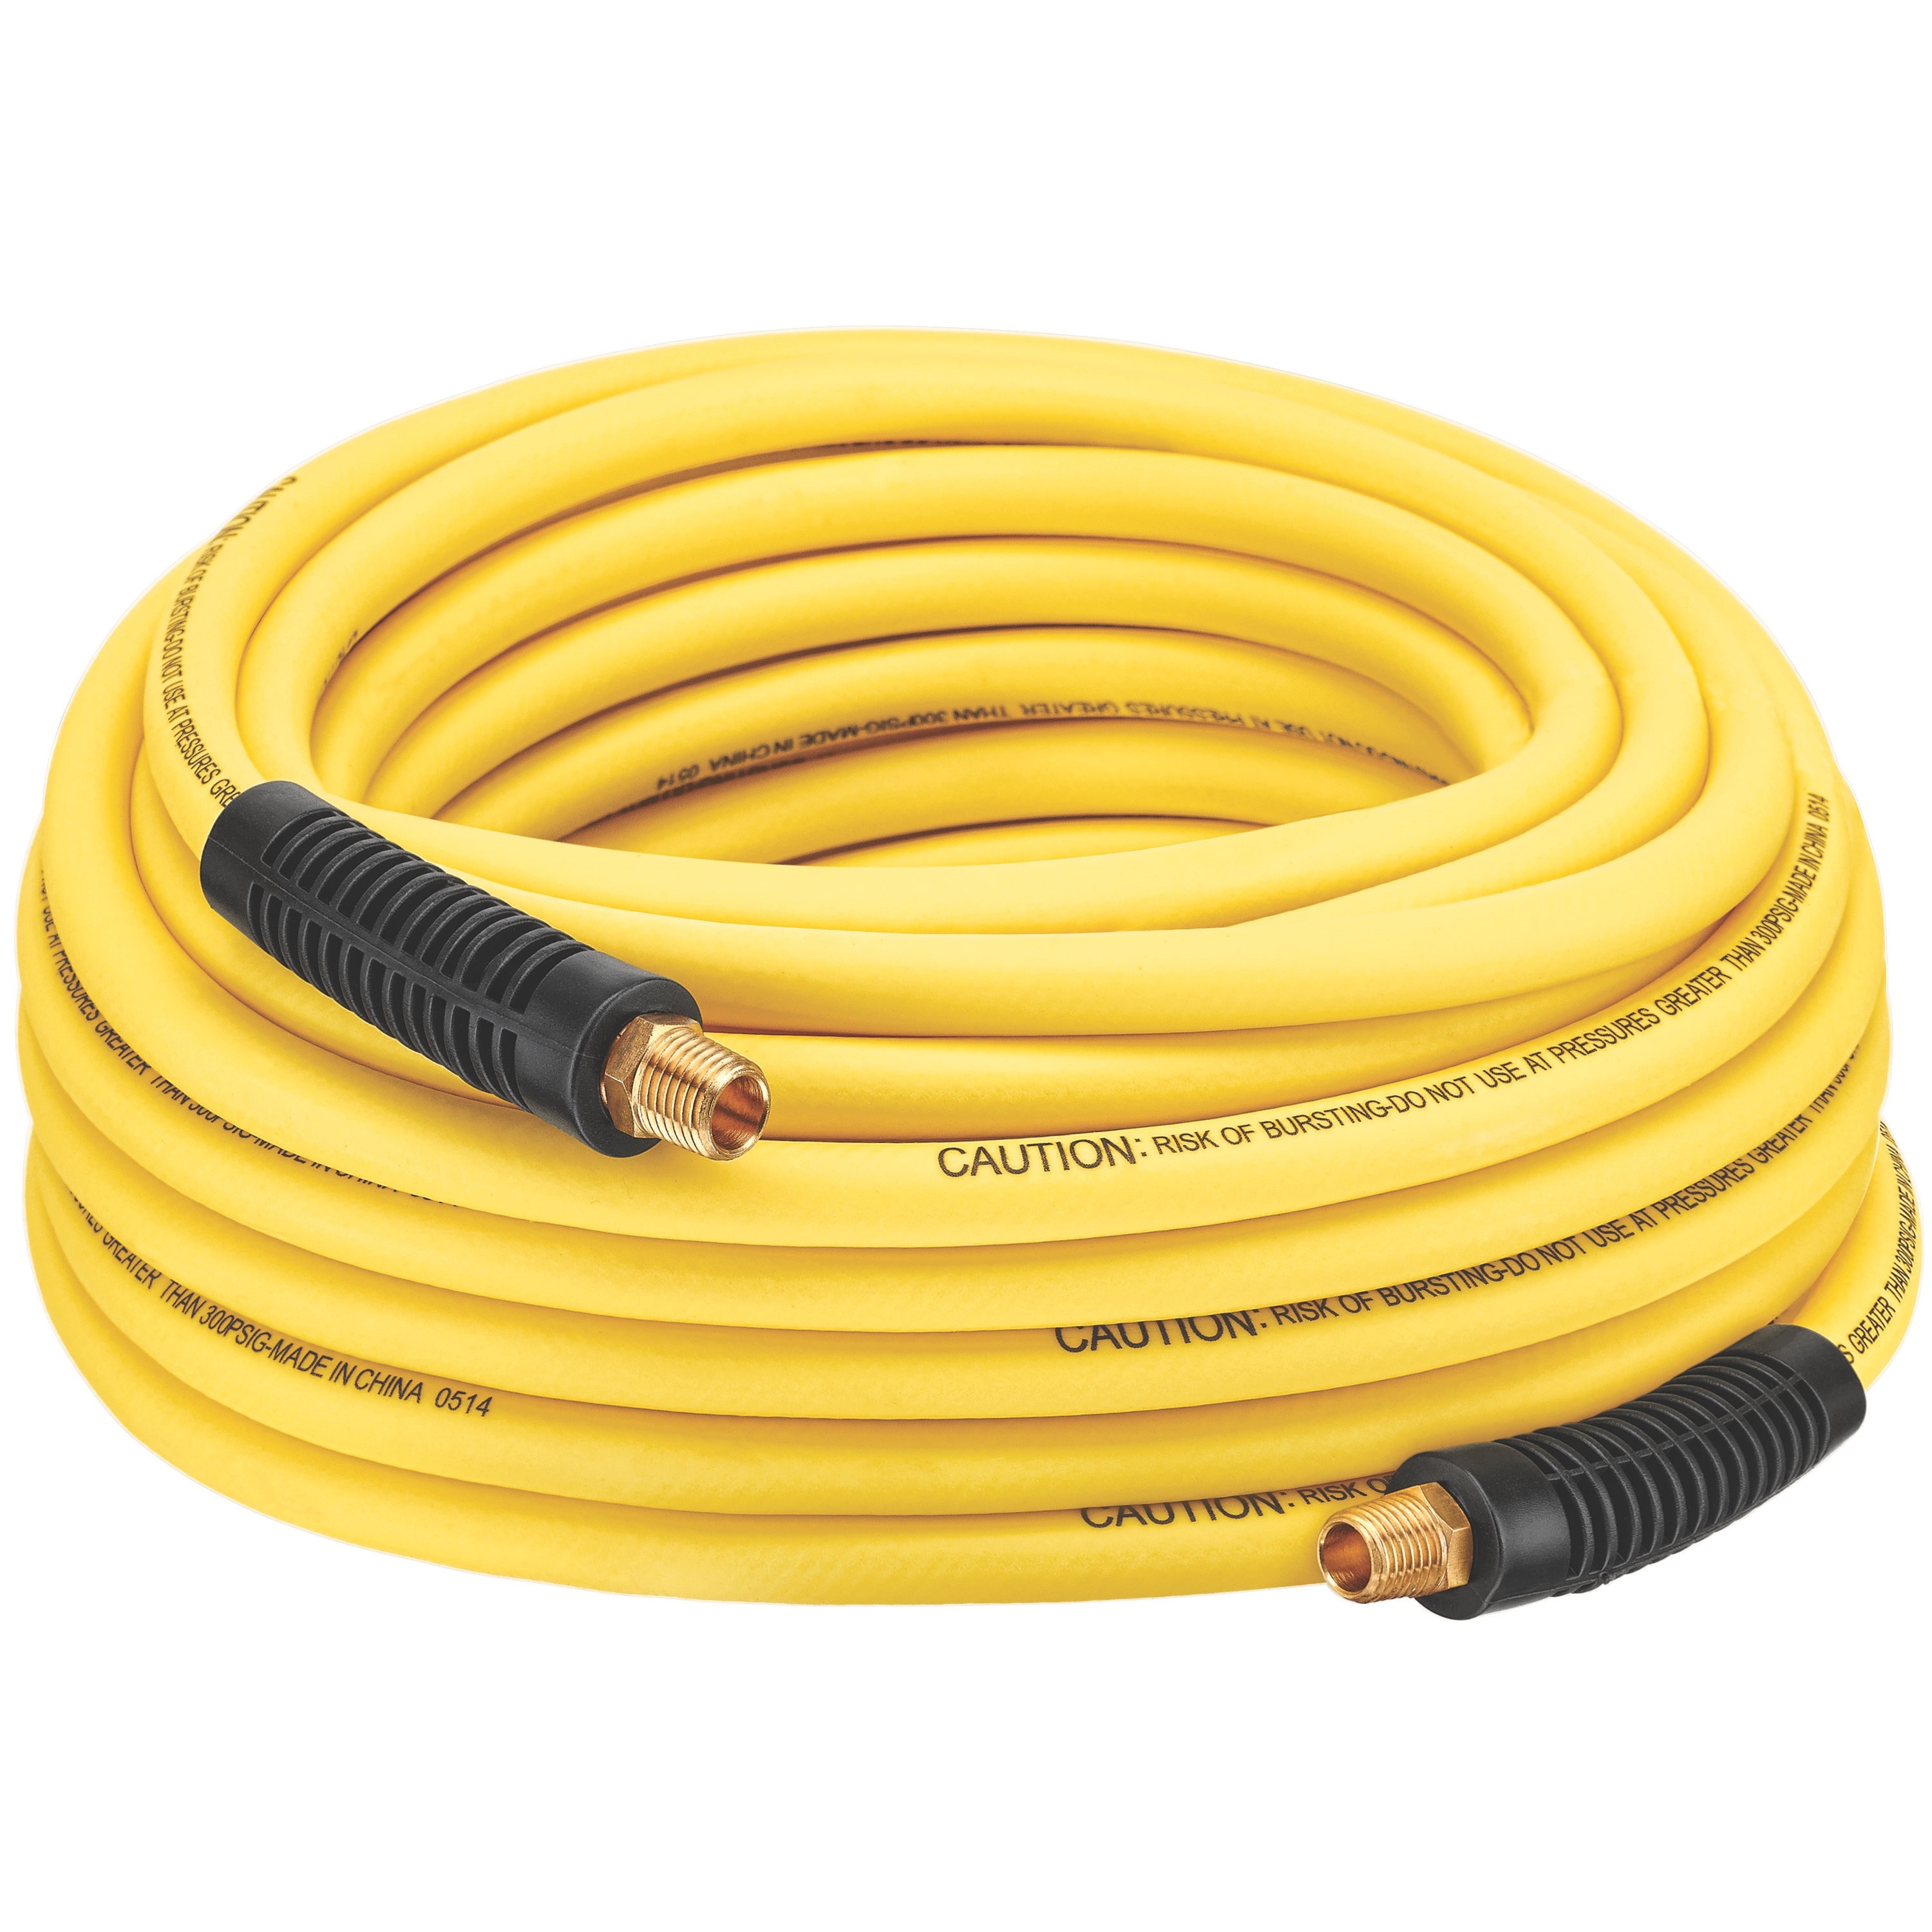 HOPB1450 Air Hose, 1/4 in OD, 50 ft L, 300 psi Pressure, PVC/Rubber, Yellow